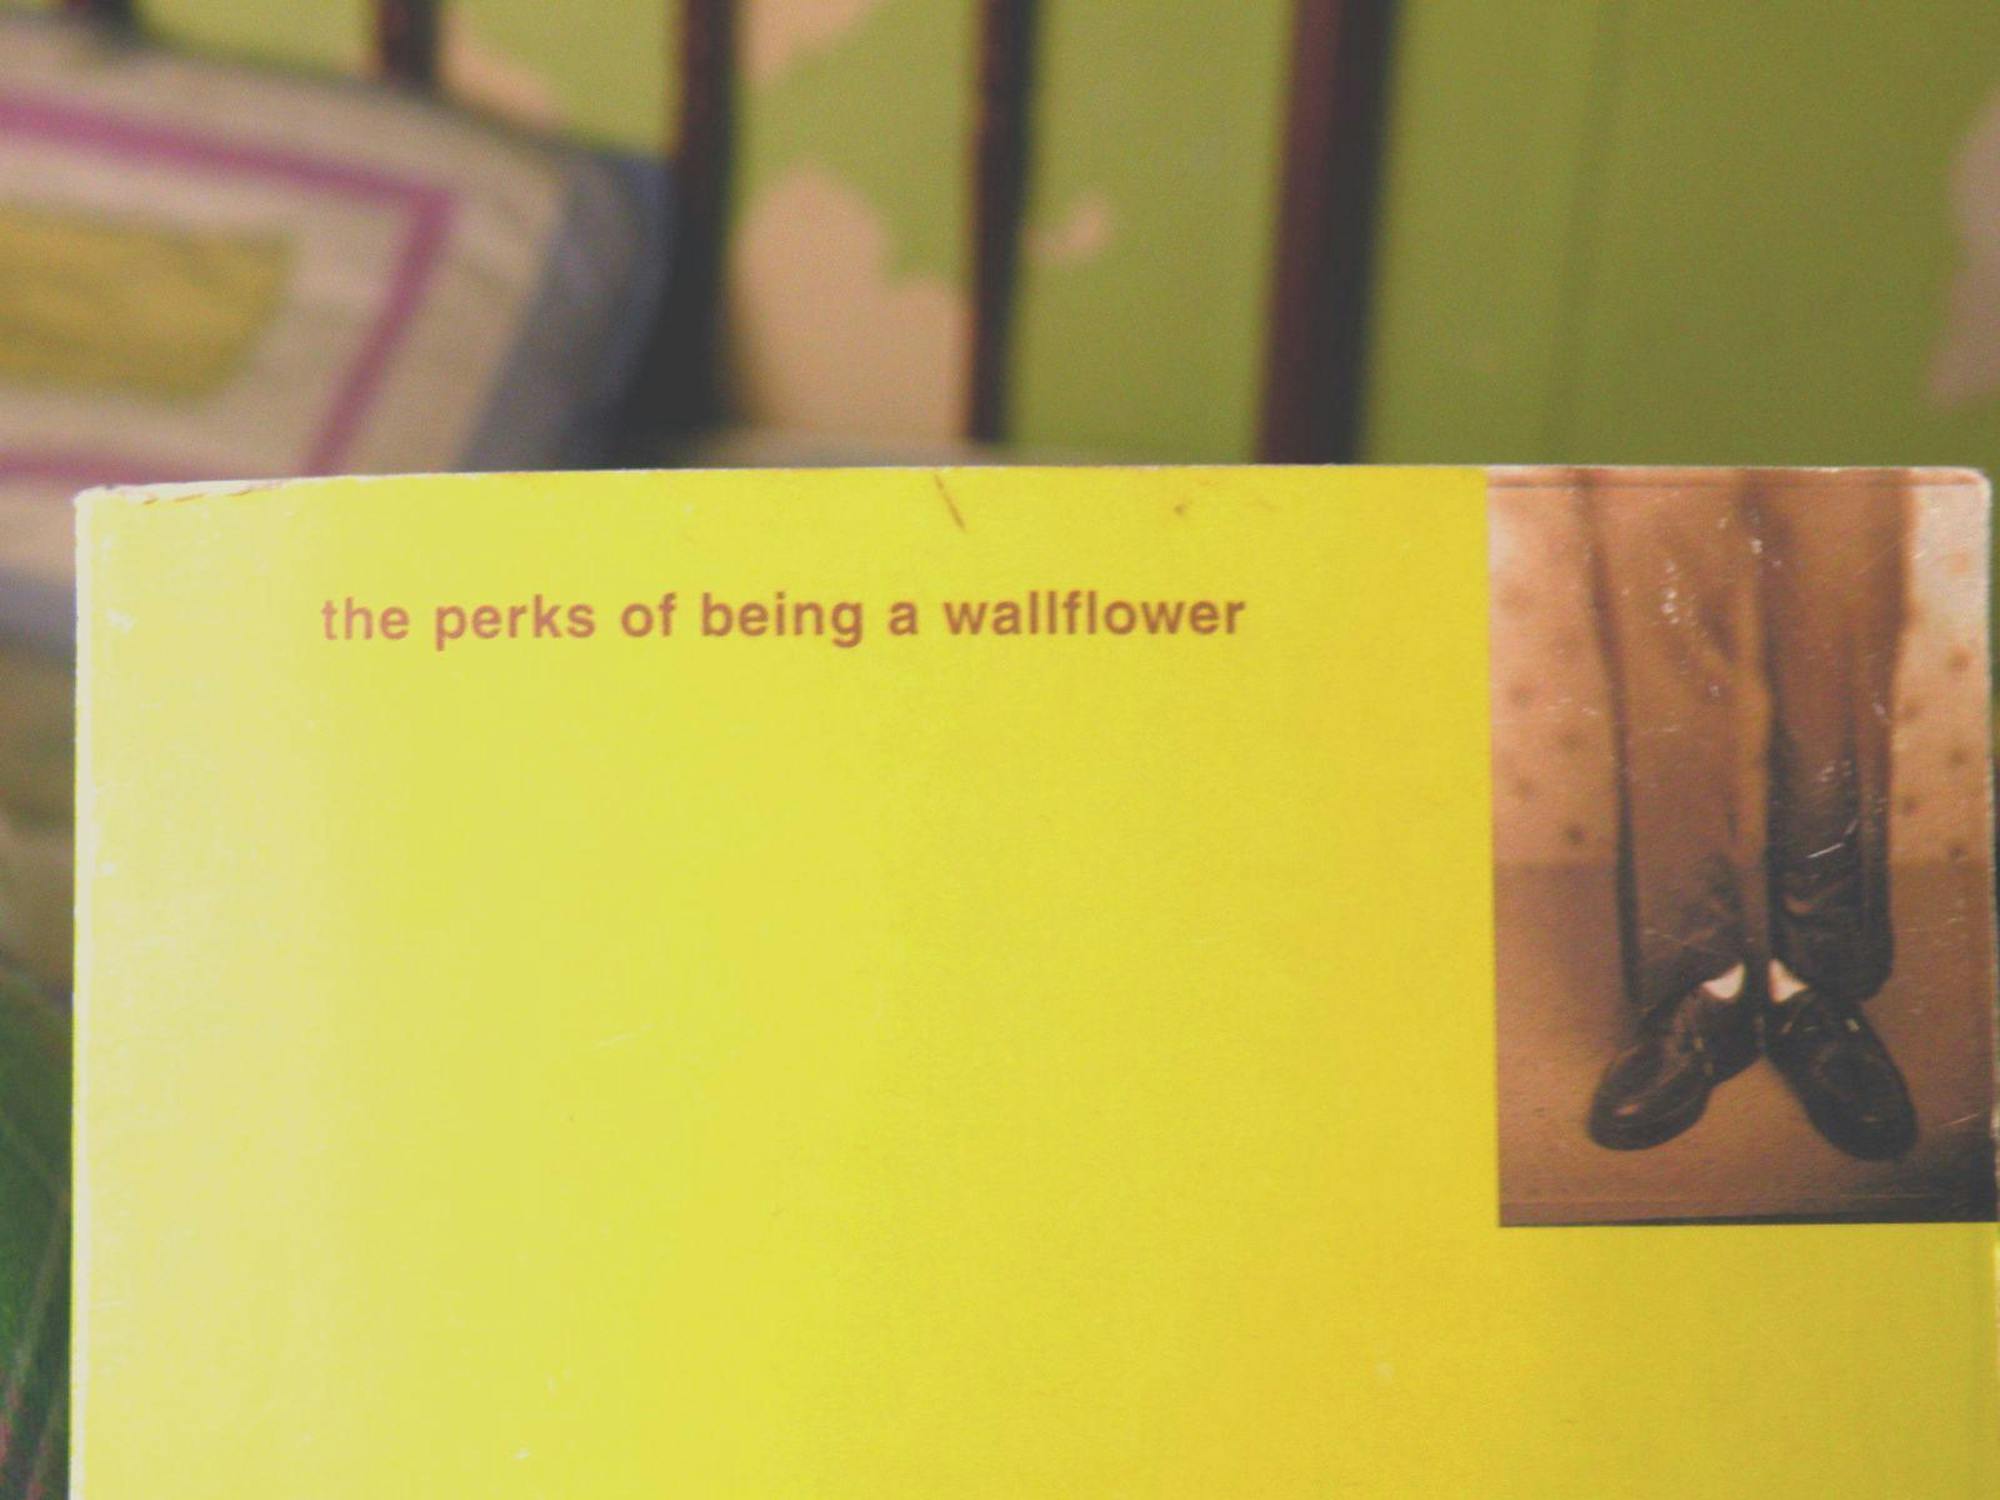 Publish Our Love: 'The Perks of Being a Wallflower' and the test of time